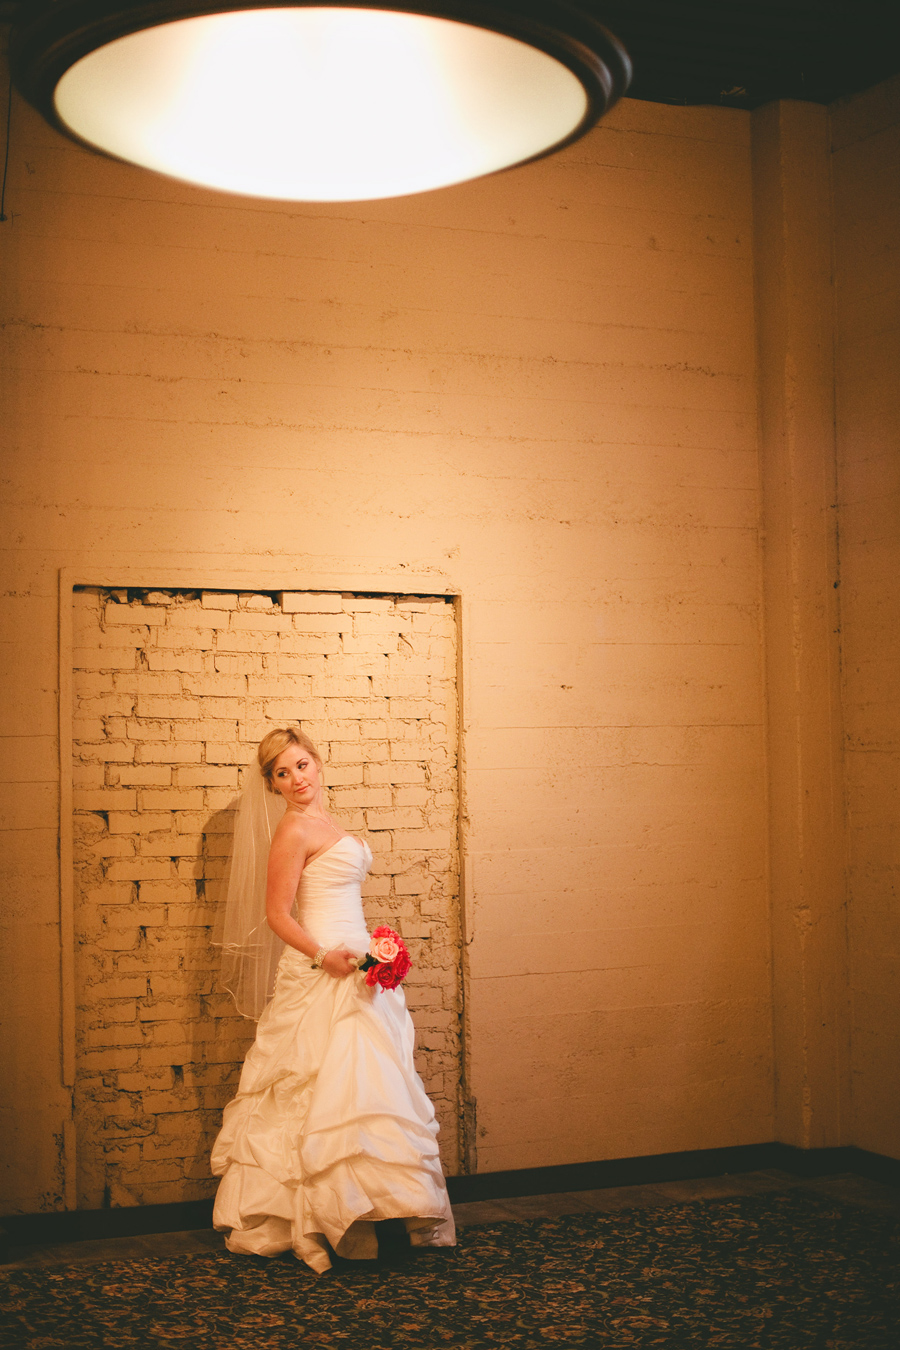 A beautiful portrait of the bride next to original stonework at the Los Gatos winery.